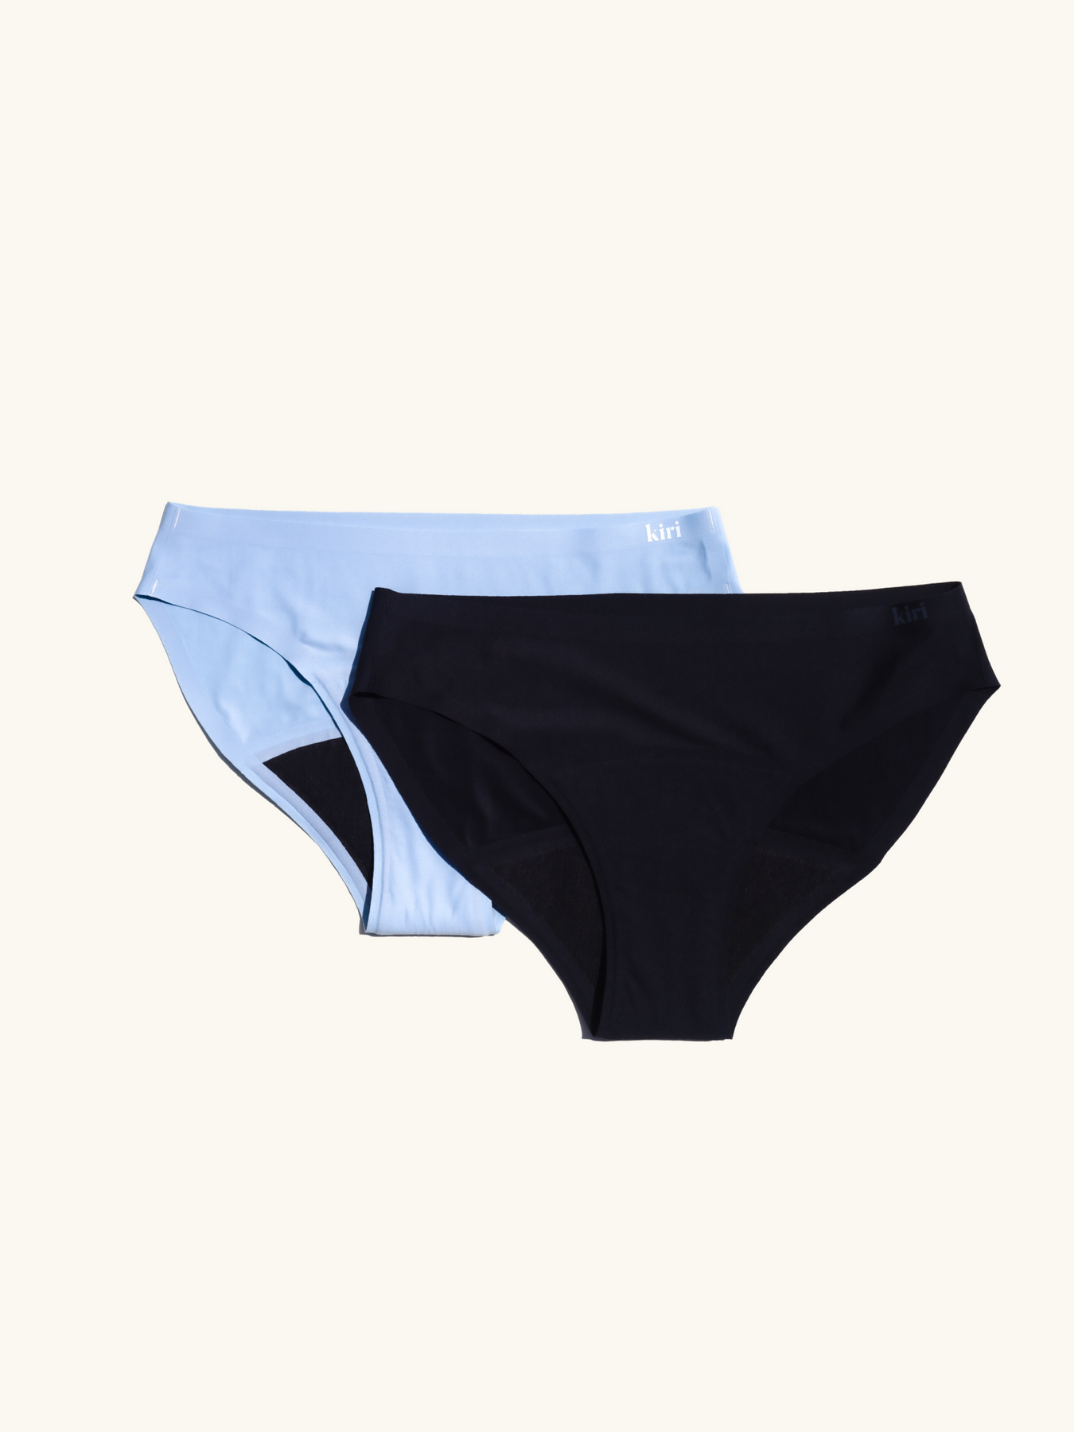 period panties Our panties consist of four layers of leakproof-infused technology that trap and lock in liquid within the water-resistant and moisture-wicking materials. This includes an outer shell fabric, a layer designed to prevent any stains or leaks, a layer of absorbent material that can hold up to 5.5 regular tampons worth of flow and a barrier to keep your intimate areas comfortable.